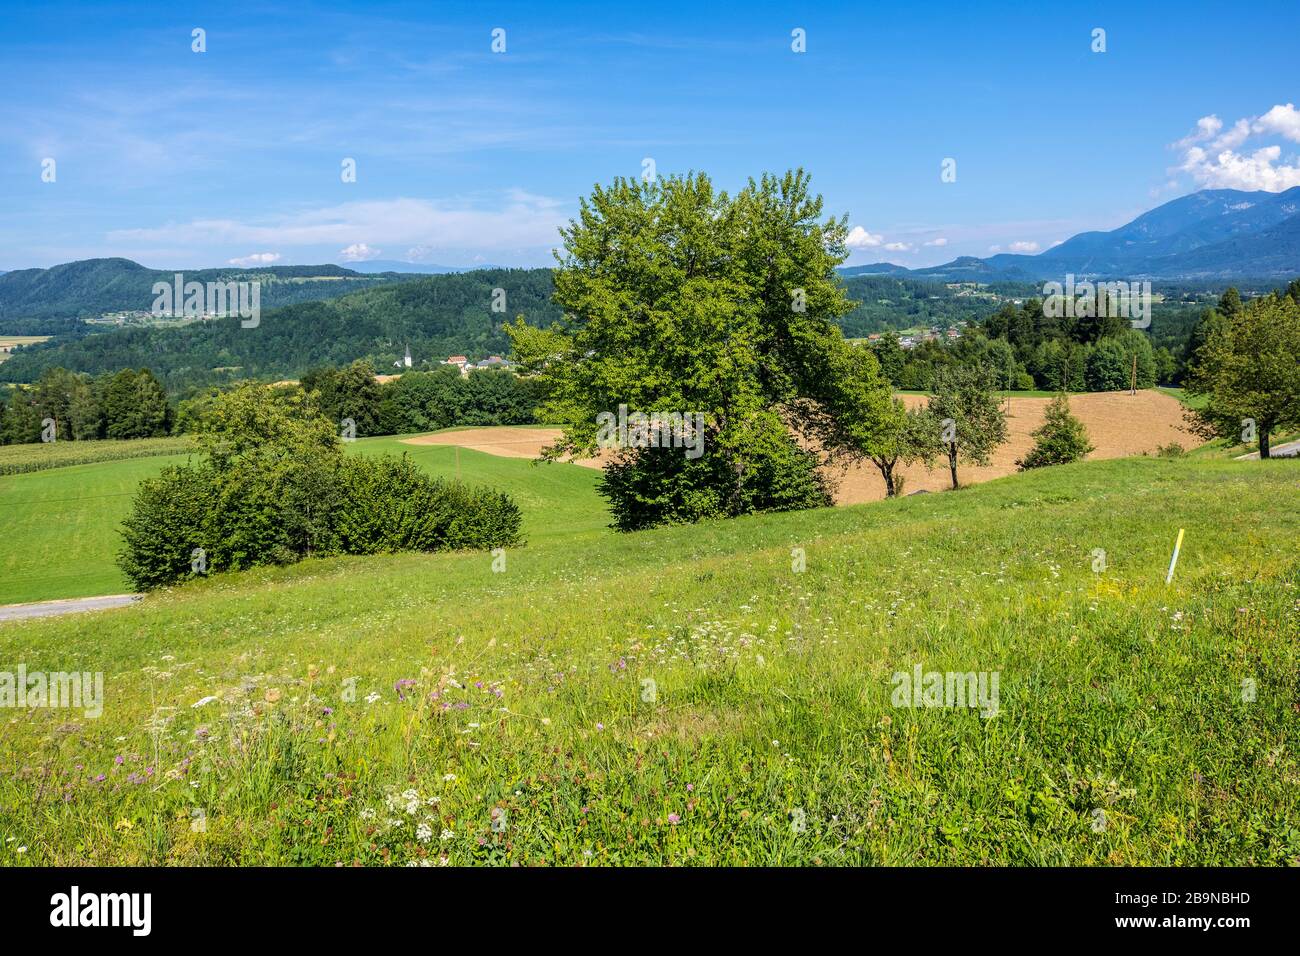 Alpine Scenery. Landscape of Carinthia in Austria with Alpine hills and valley Stock Photo